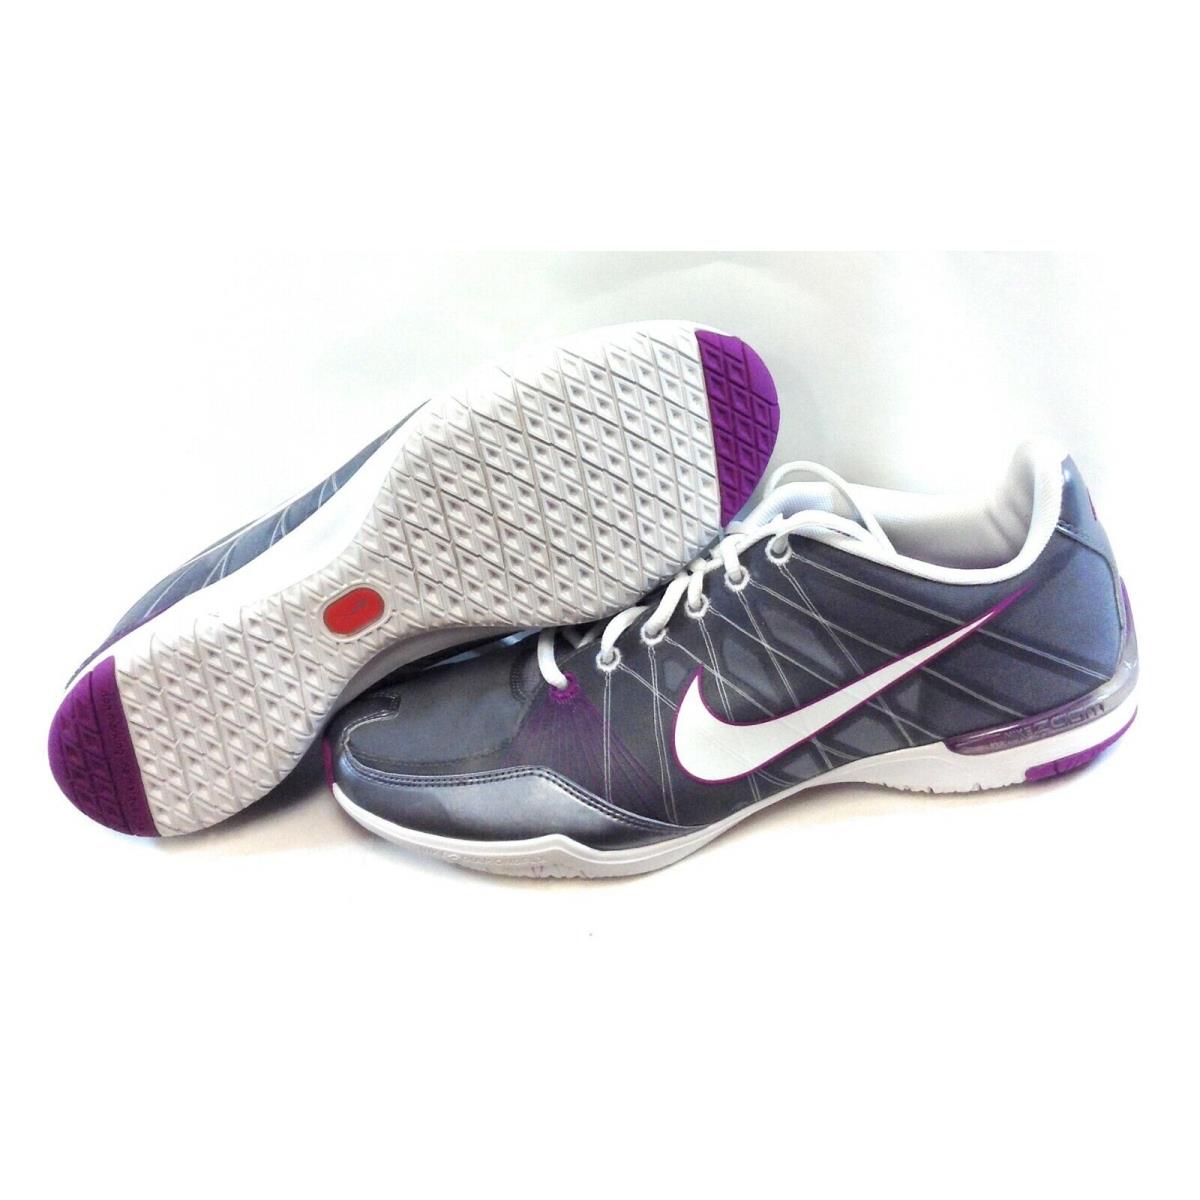 Womens Nike Zoom Sister One + 344986 014 Grey Purple 2009 DS Sneakers Shoes